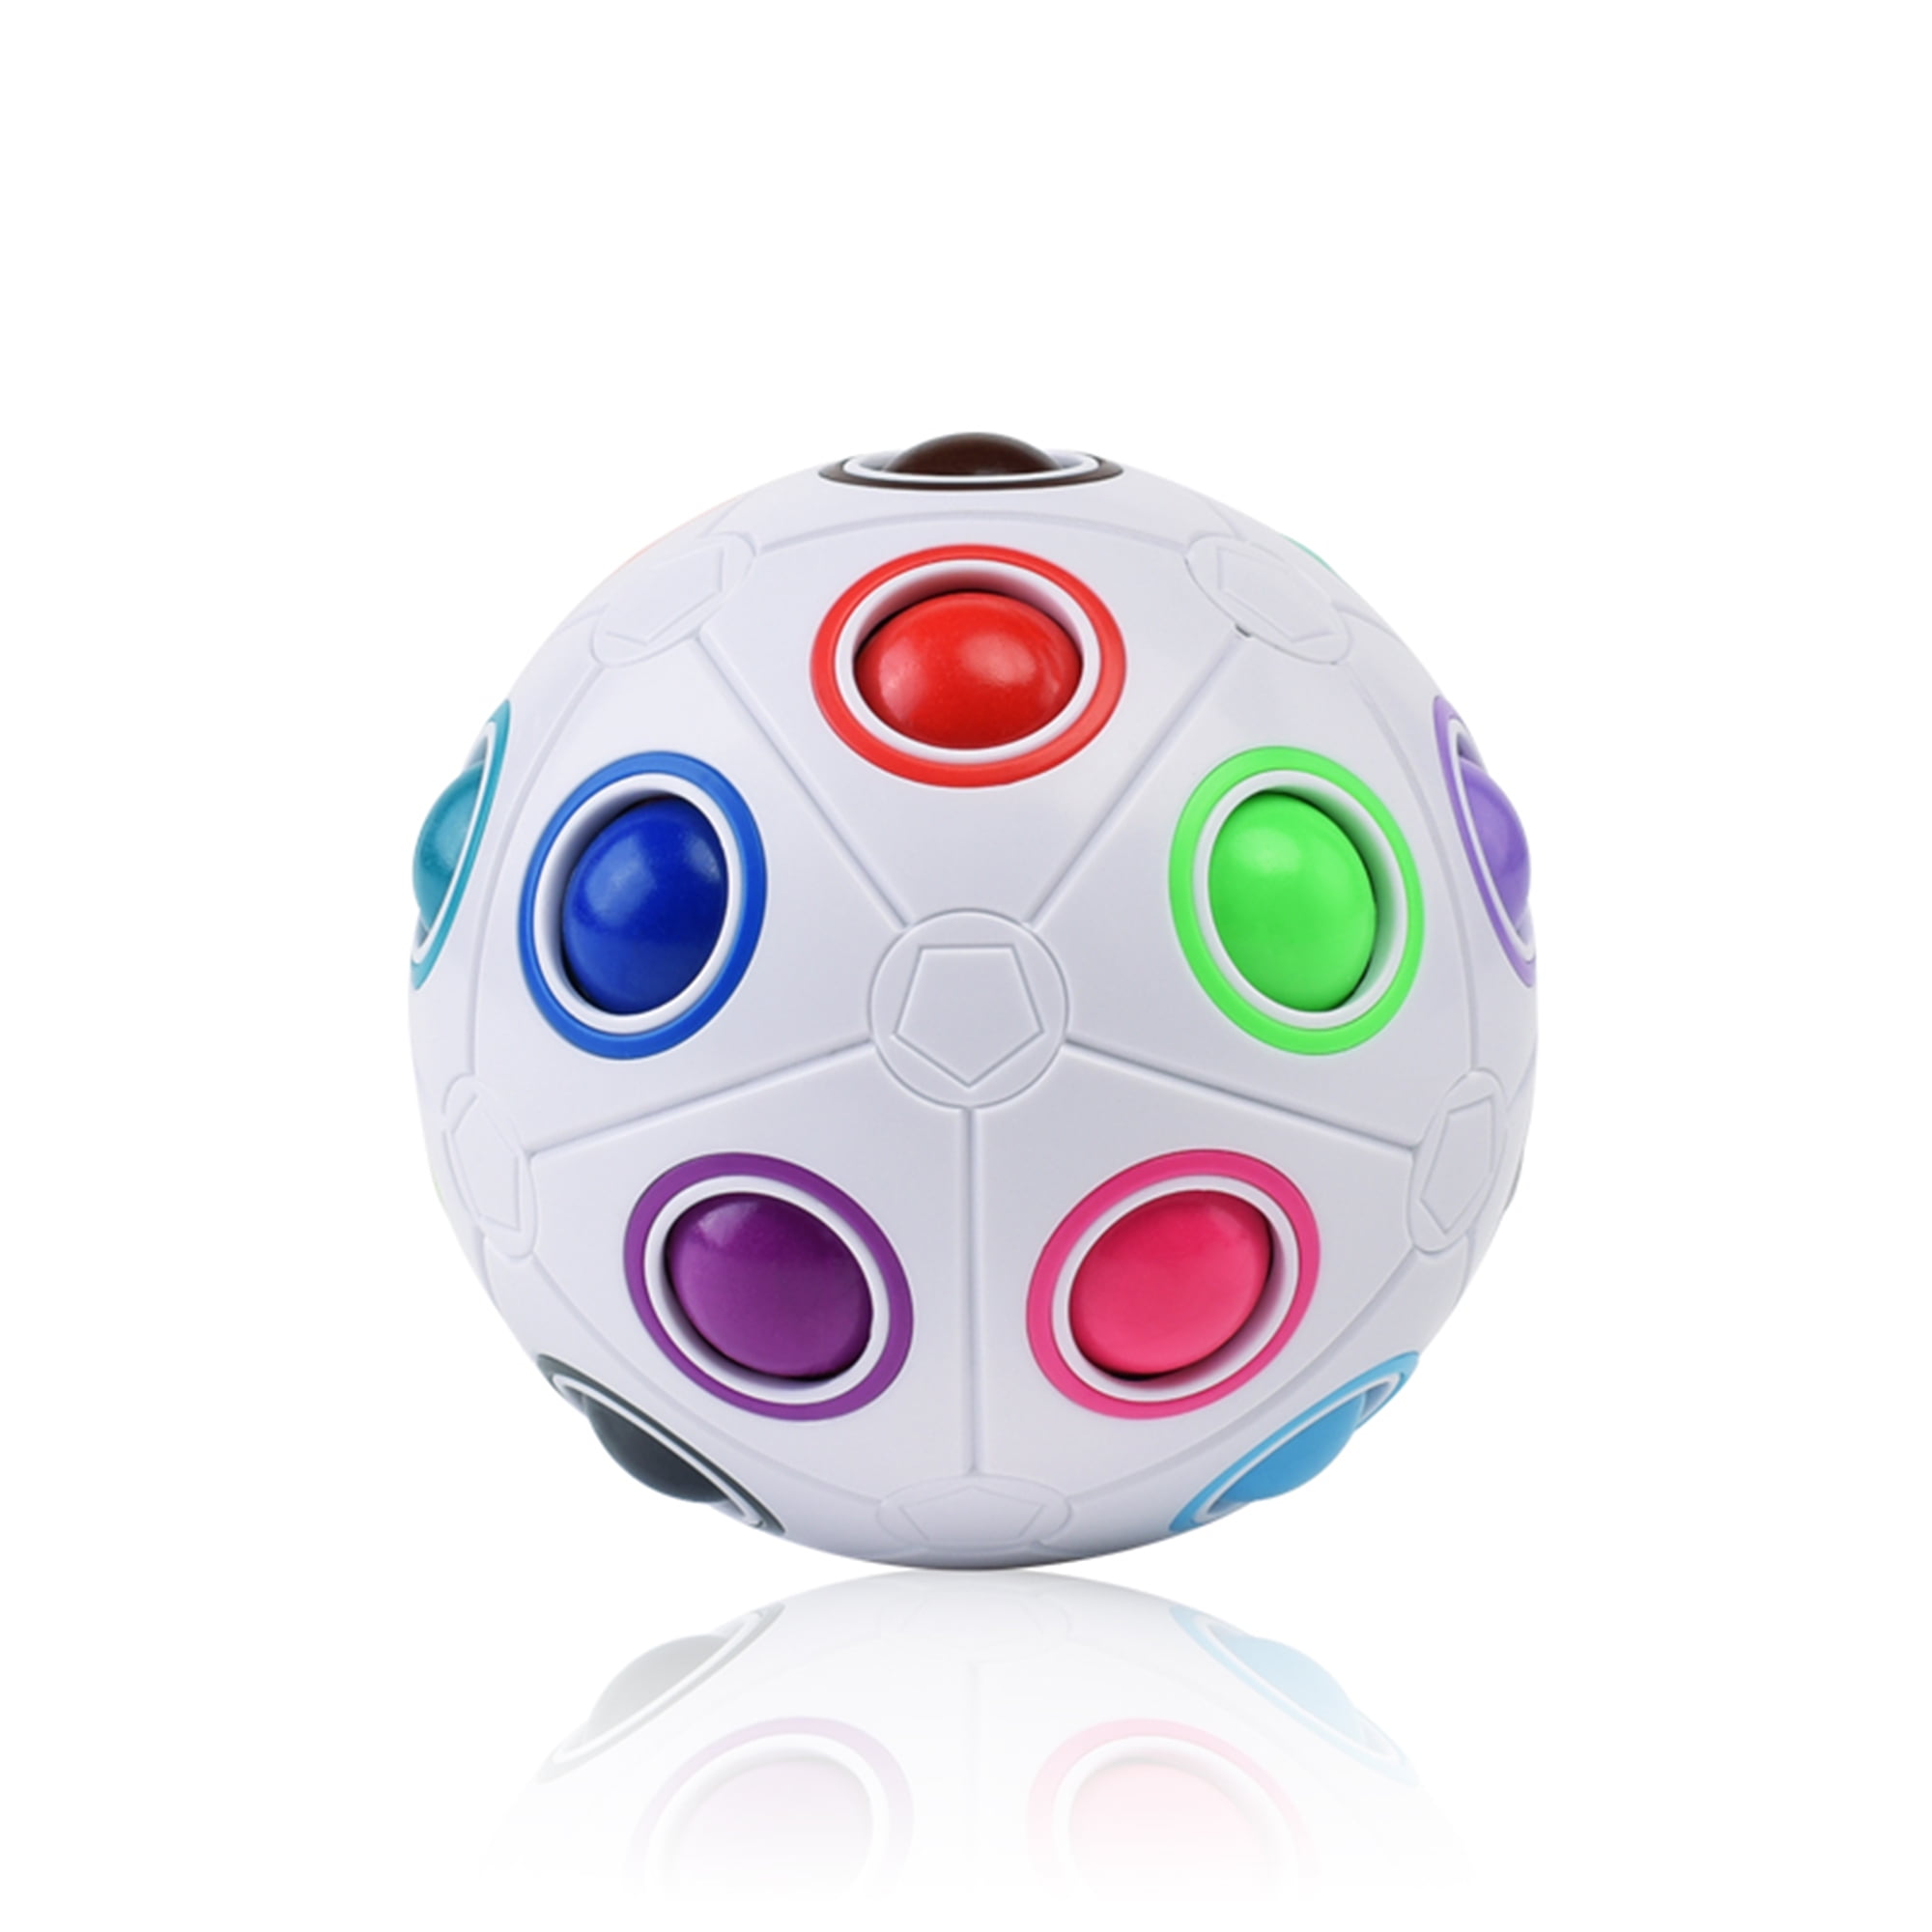 Coolzon Magic Rainbow Ball Fidget Ball New Version Puzzle Ball Magic Ball Speed Cube 3D Puzzle Fidget Toy for Adults & Kids White